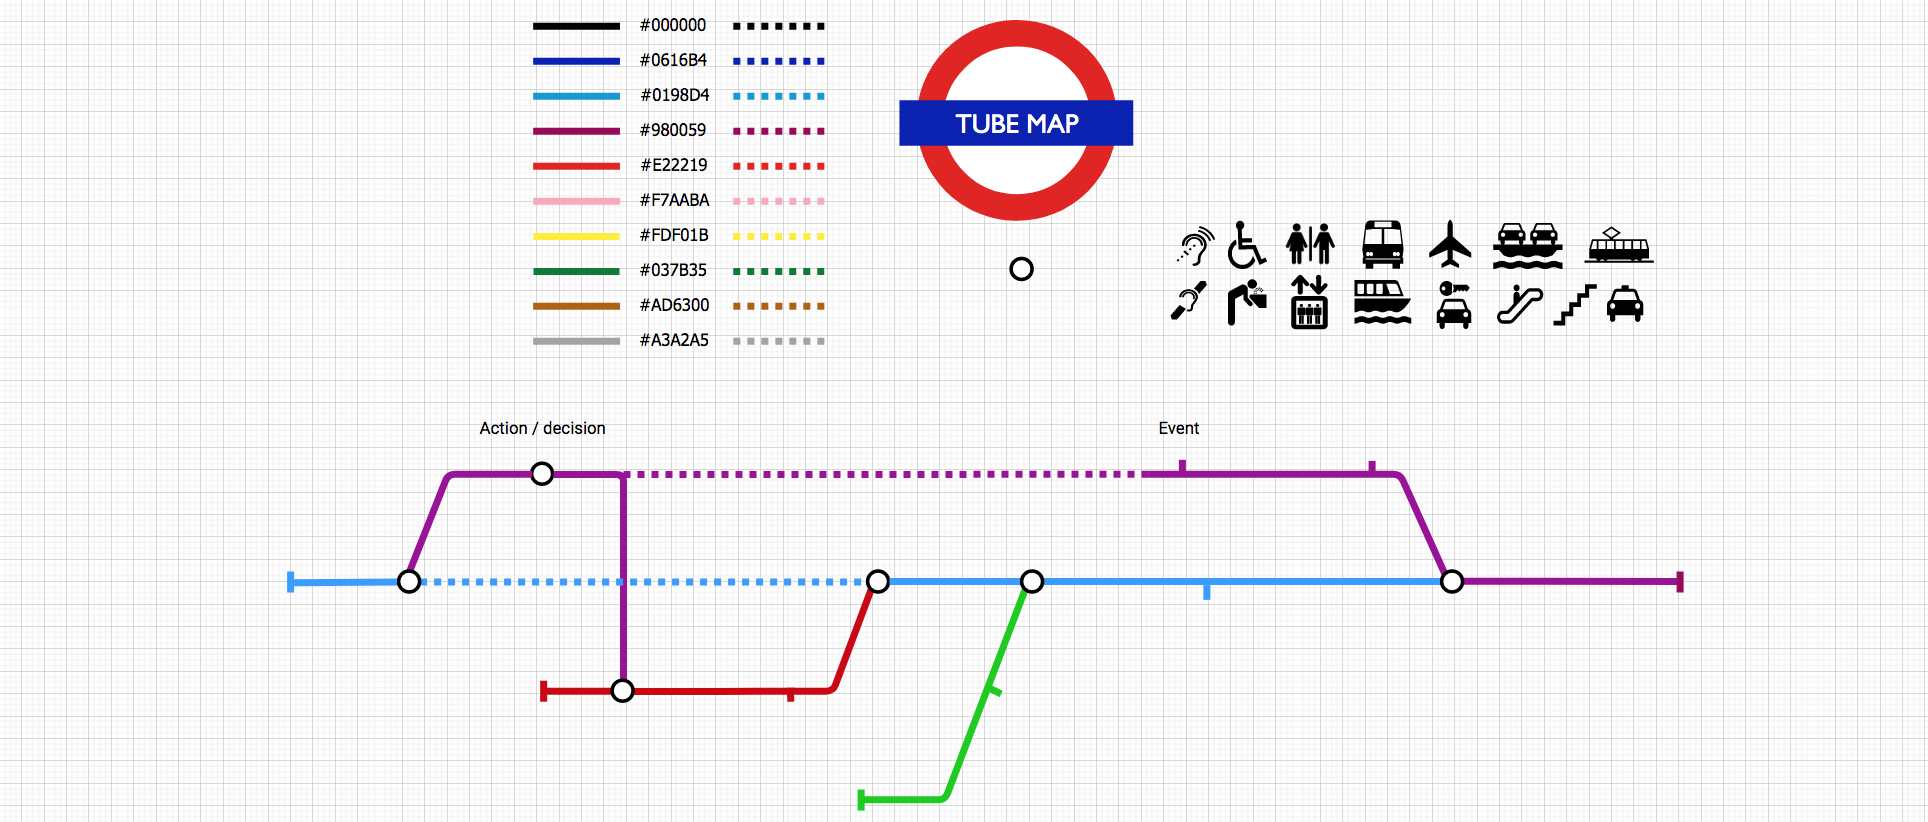 template elements to make a London style tube map, with colour code for the lines, icon on a grid paper view